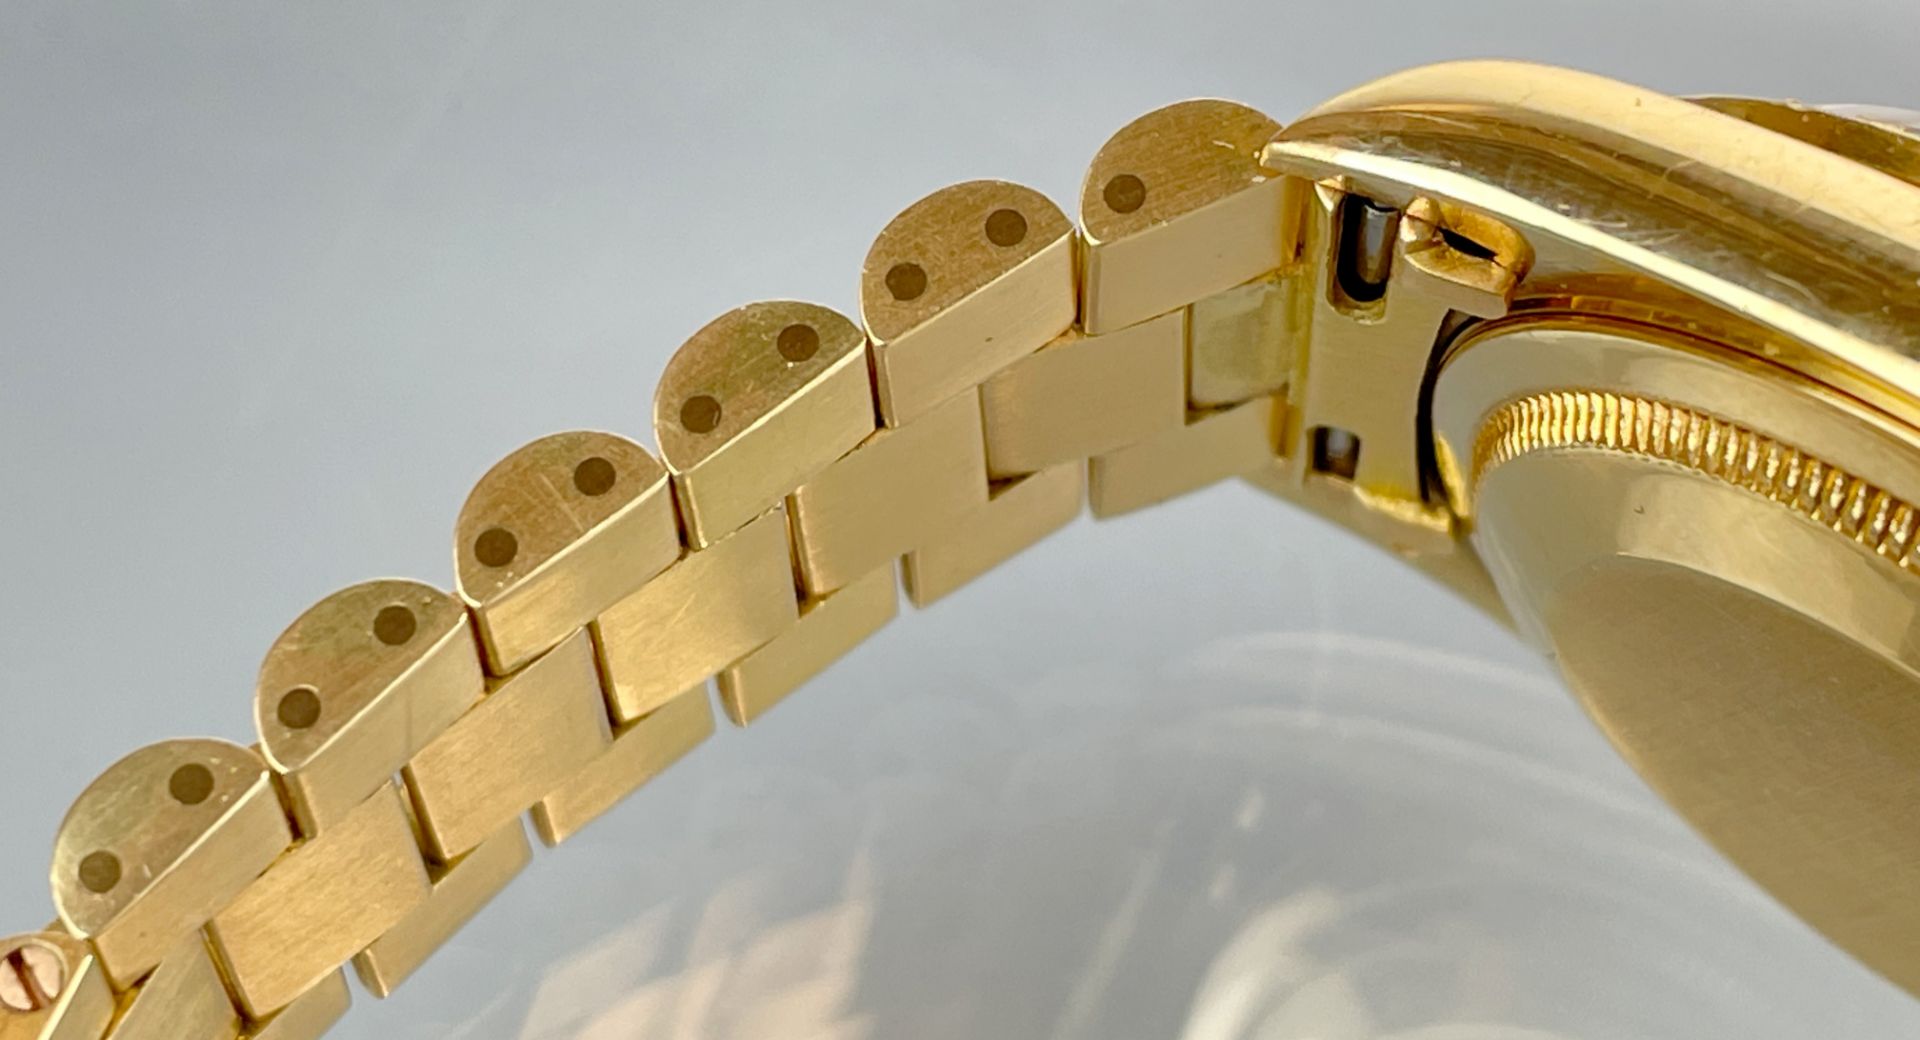 Wristwatch ROLEX Day-Date 750 yellow gold with diamonds. End of the 1980s. - Image 6 of 17